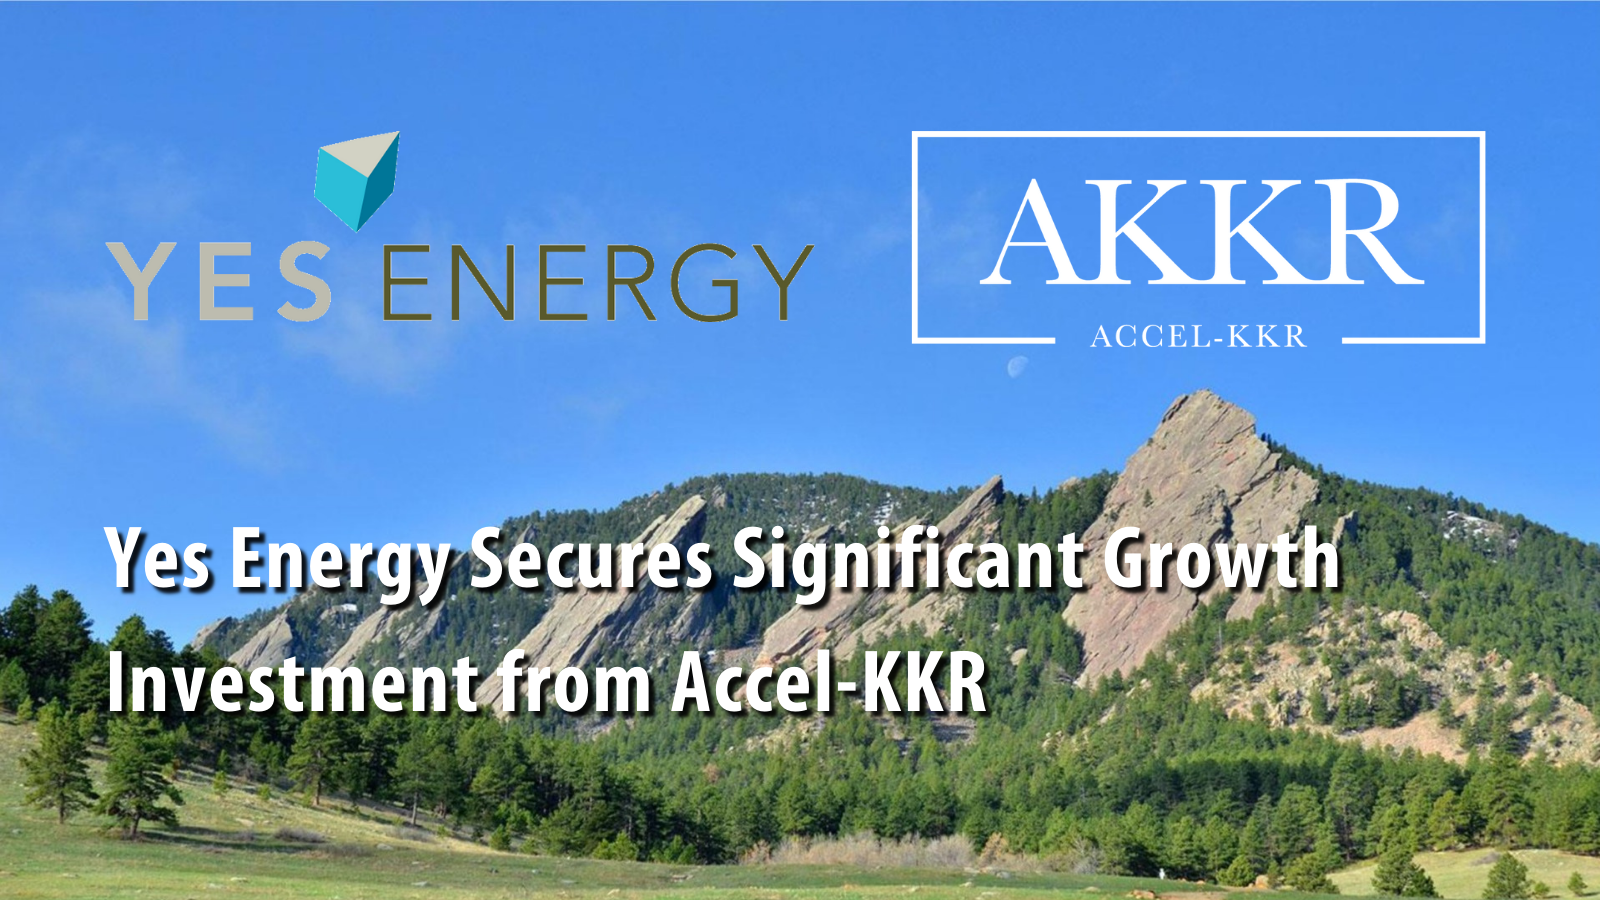 Yes Energy Announces Significant Investment from Accel-KKR